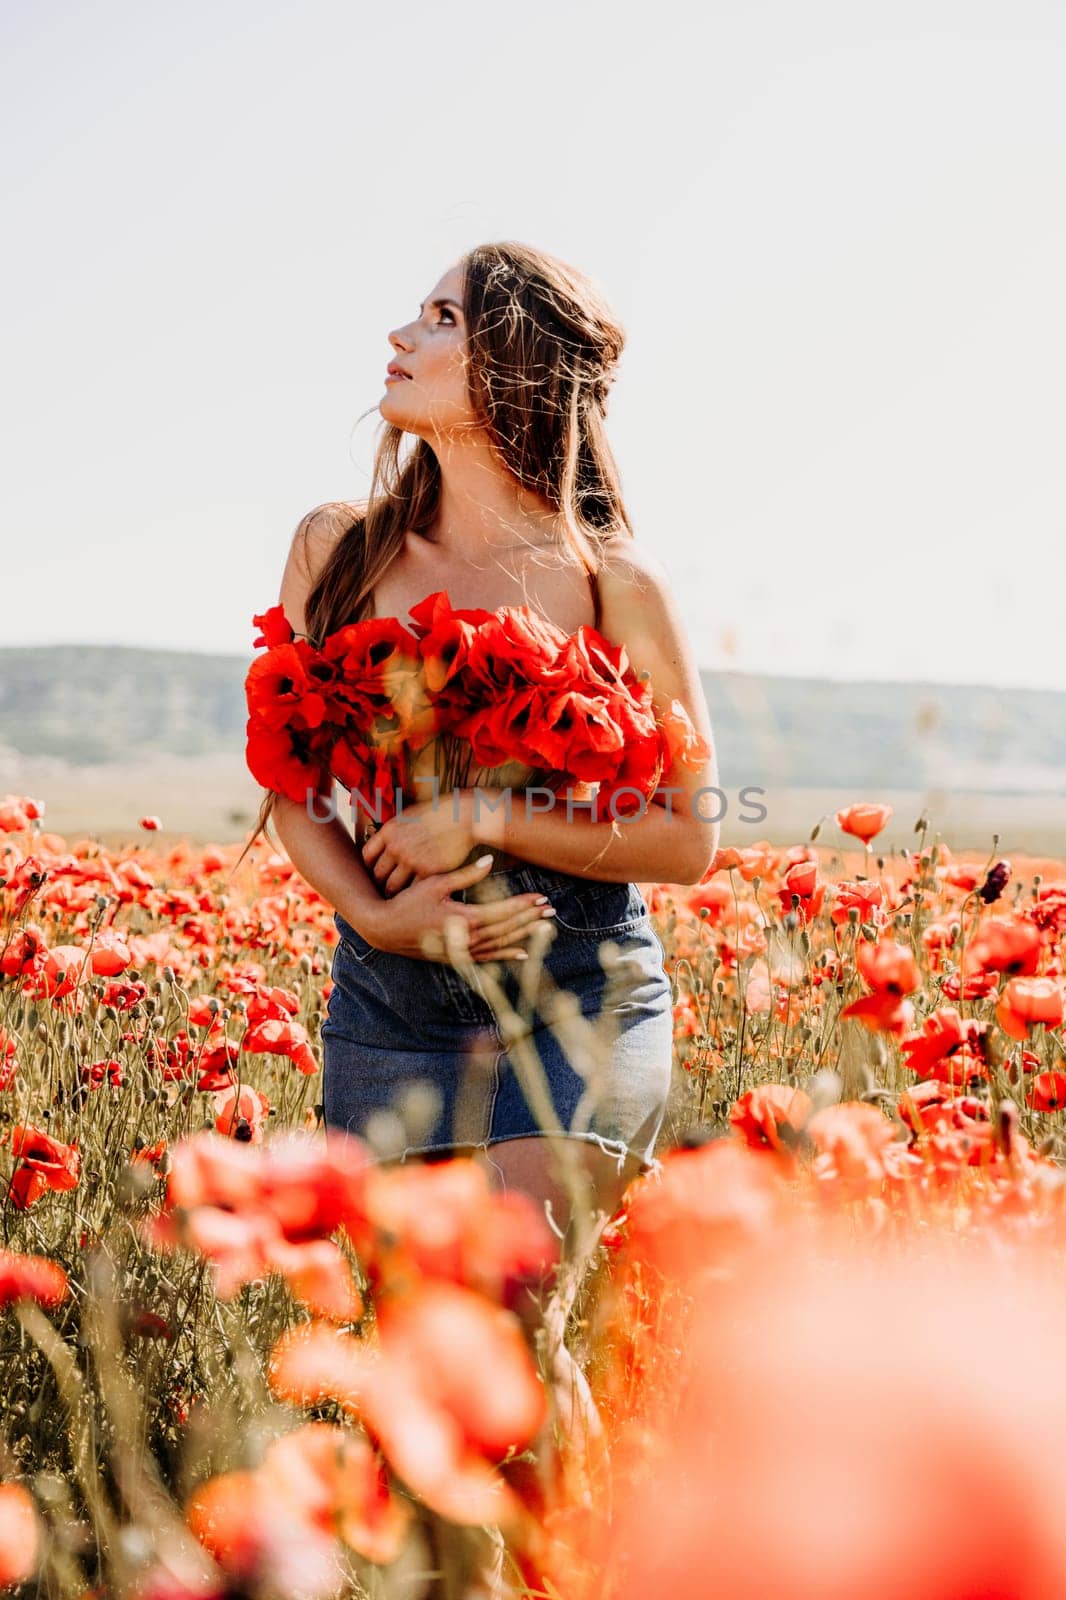 Woman poppies field. portrait of a happy woman with long hair in a poppy field and enjoying the beauty of nature in a warm summer day